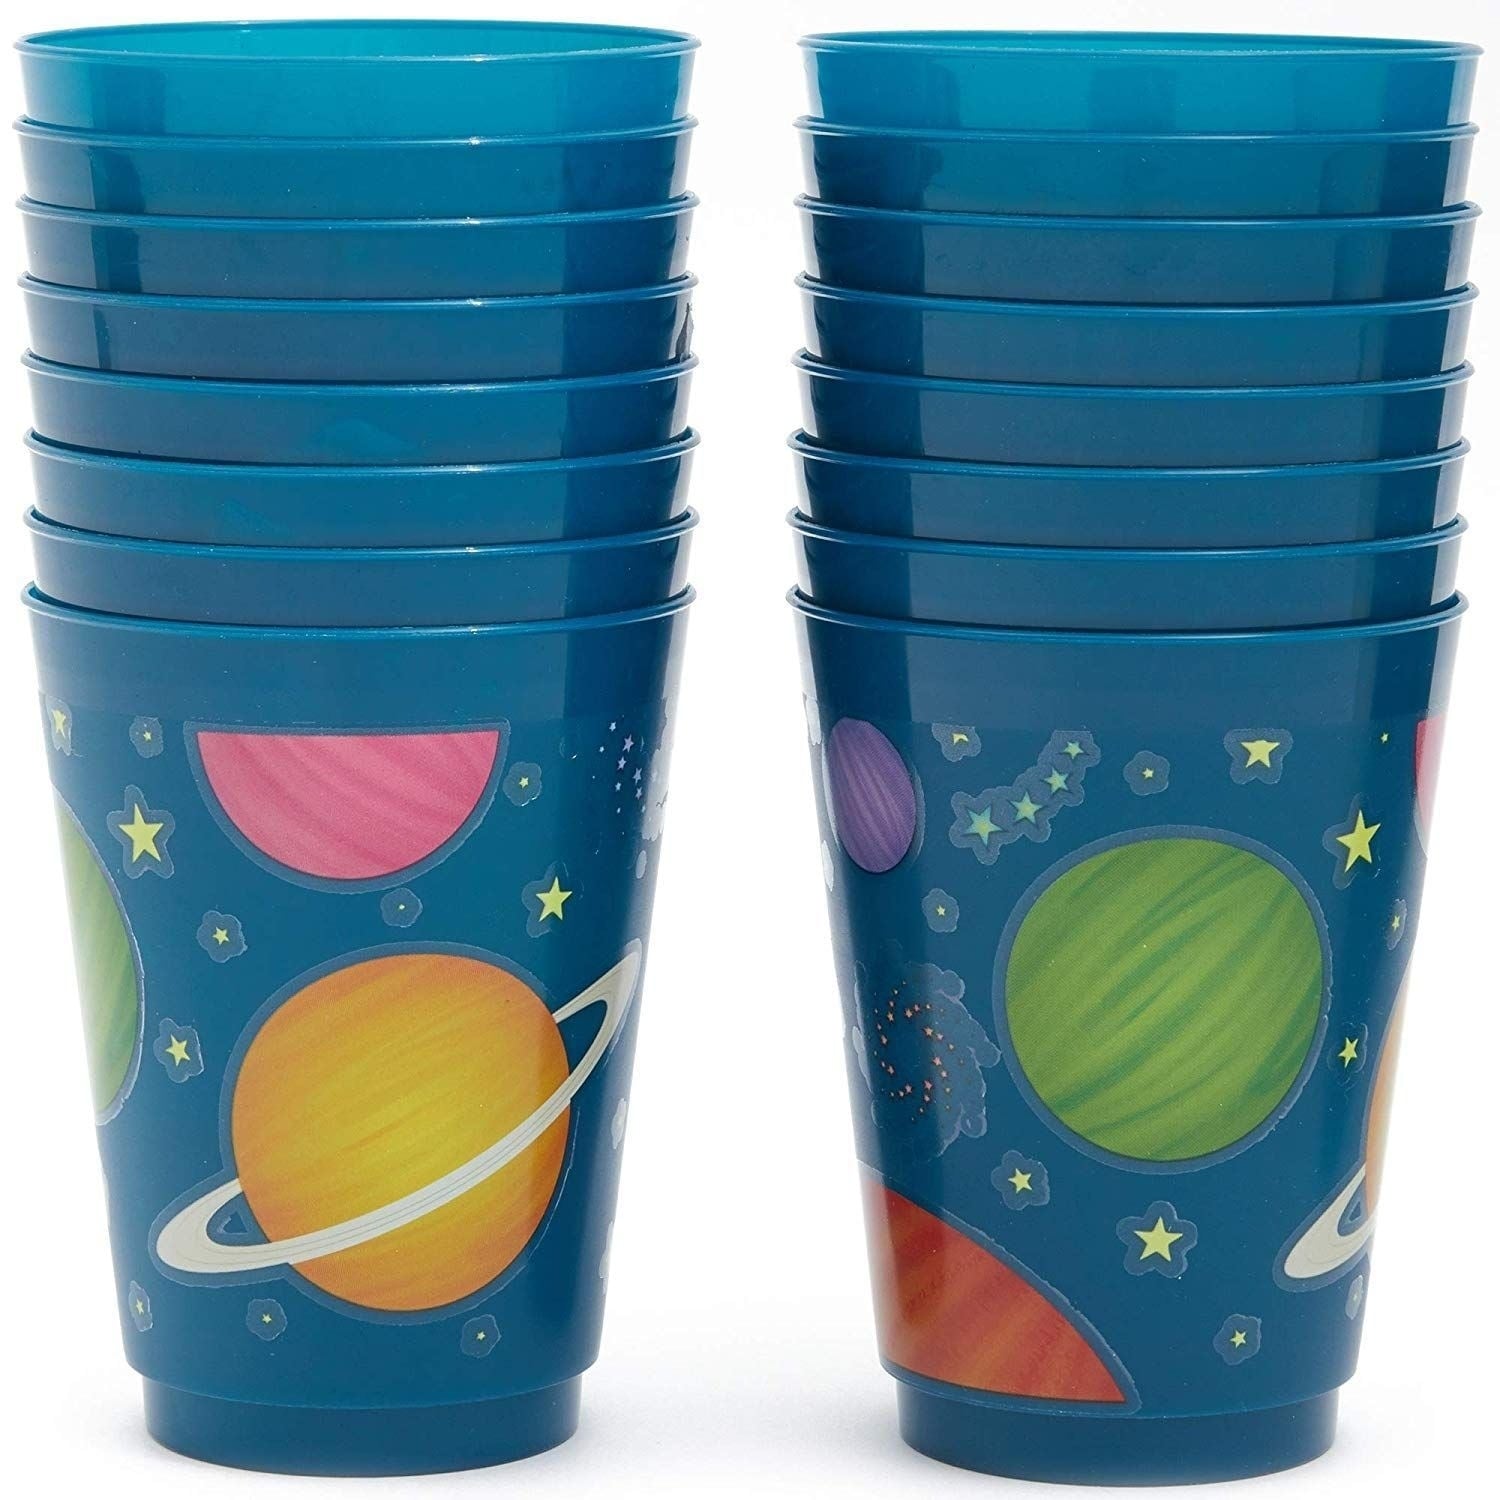 https://ak1.ostkcdn.com/images/products/31094300/16-Pack-Plastic-16-oz-Party-Cups-Solar-System-Planets-Galaxy-Space-Reusable-Tumblers-for-Kids-Birthday-0a7d8636-4975-4320-bb7e-2417092f0f5d.jpg